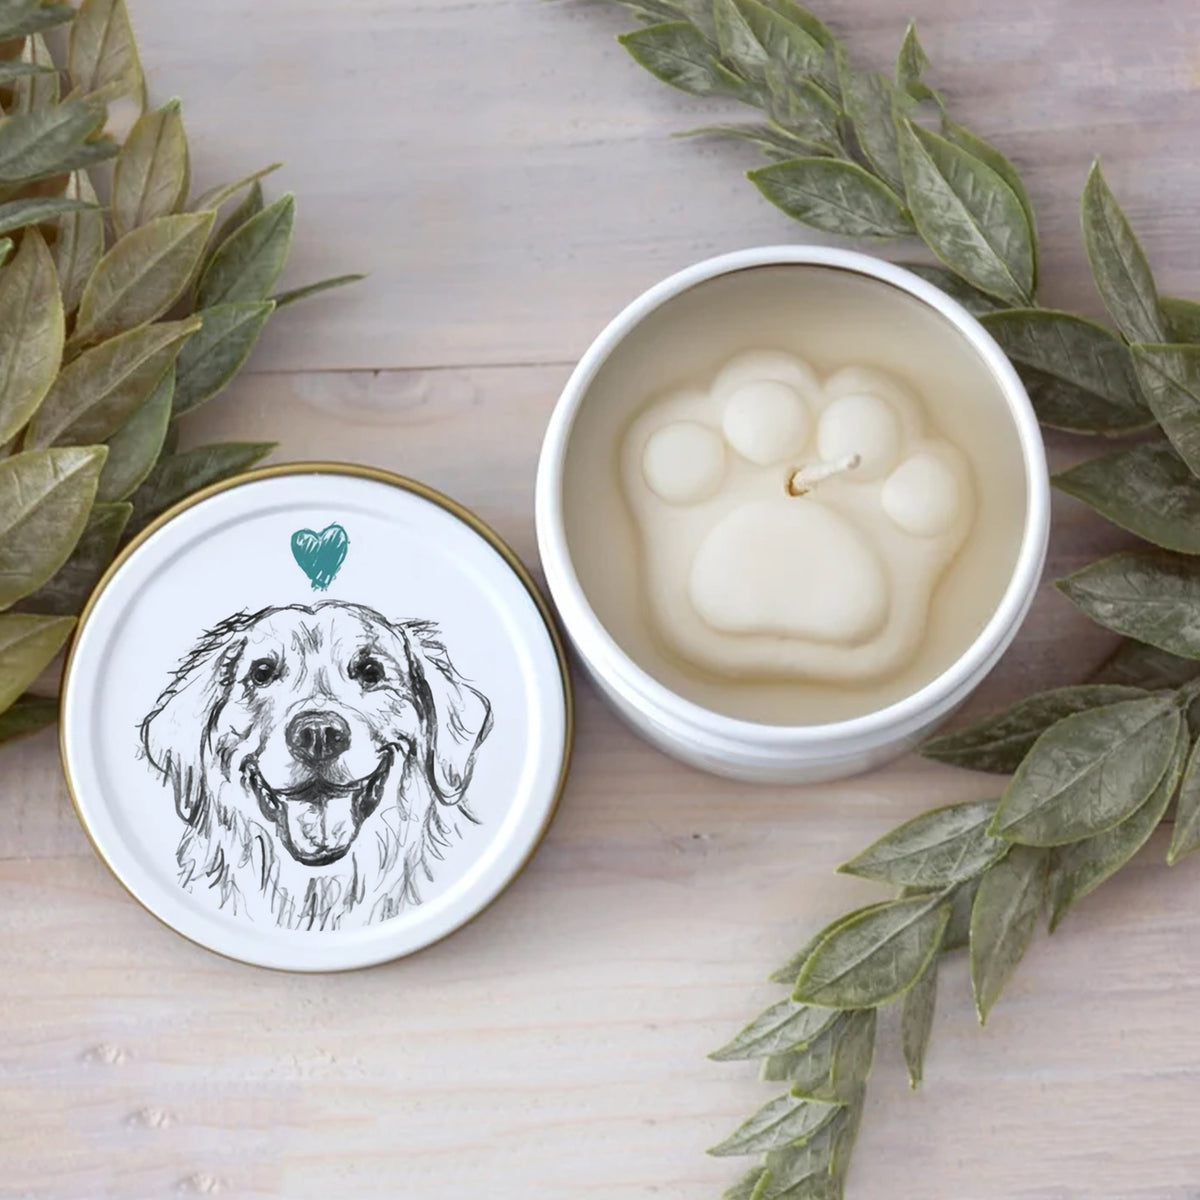 Golden Retriever Paw Print Soy Candle - Dog Lover Gift